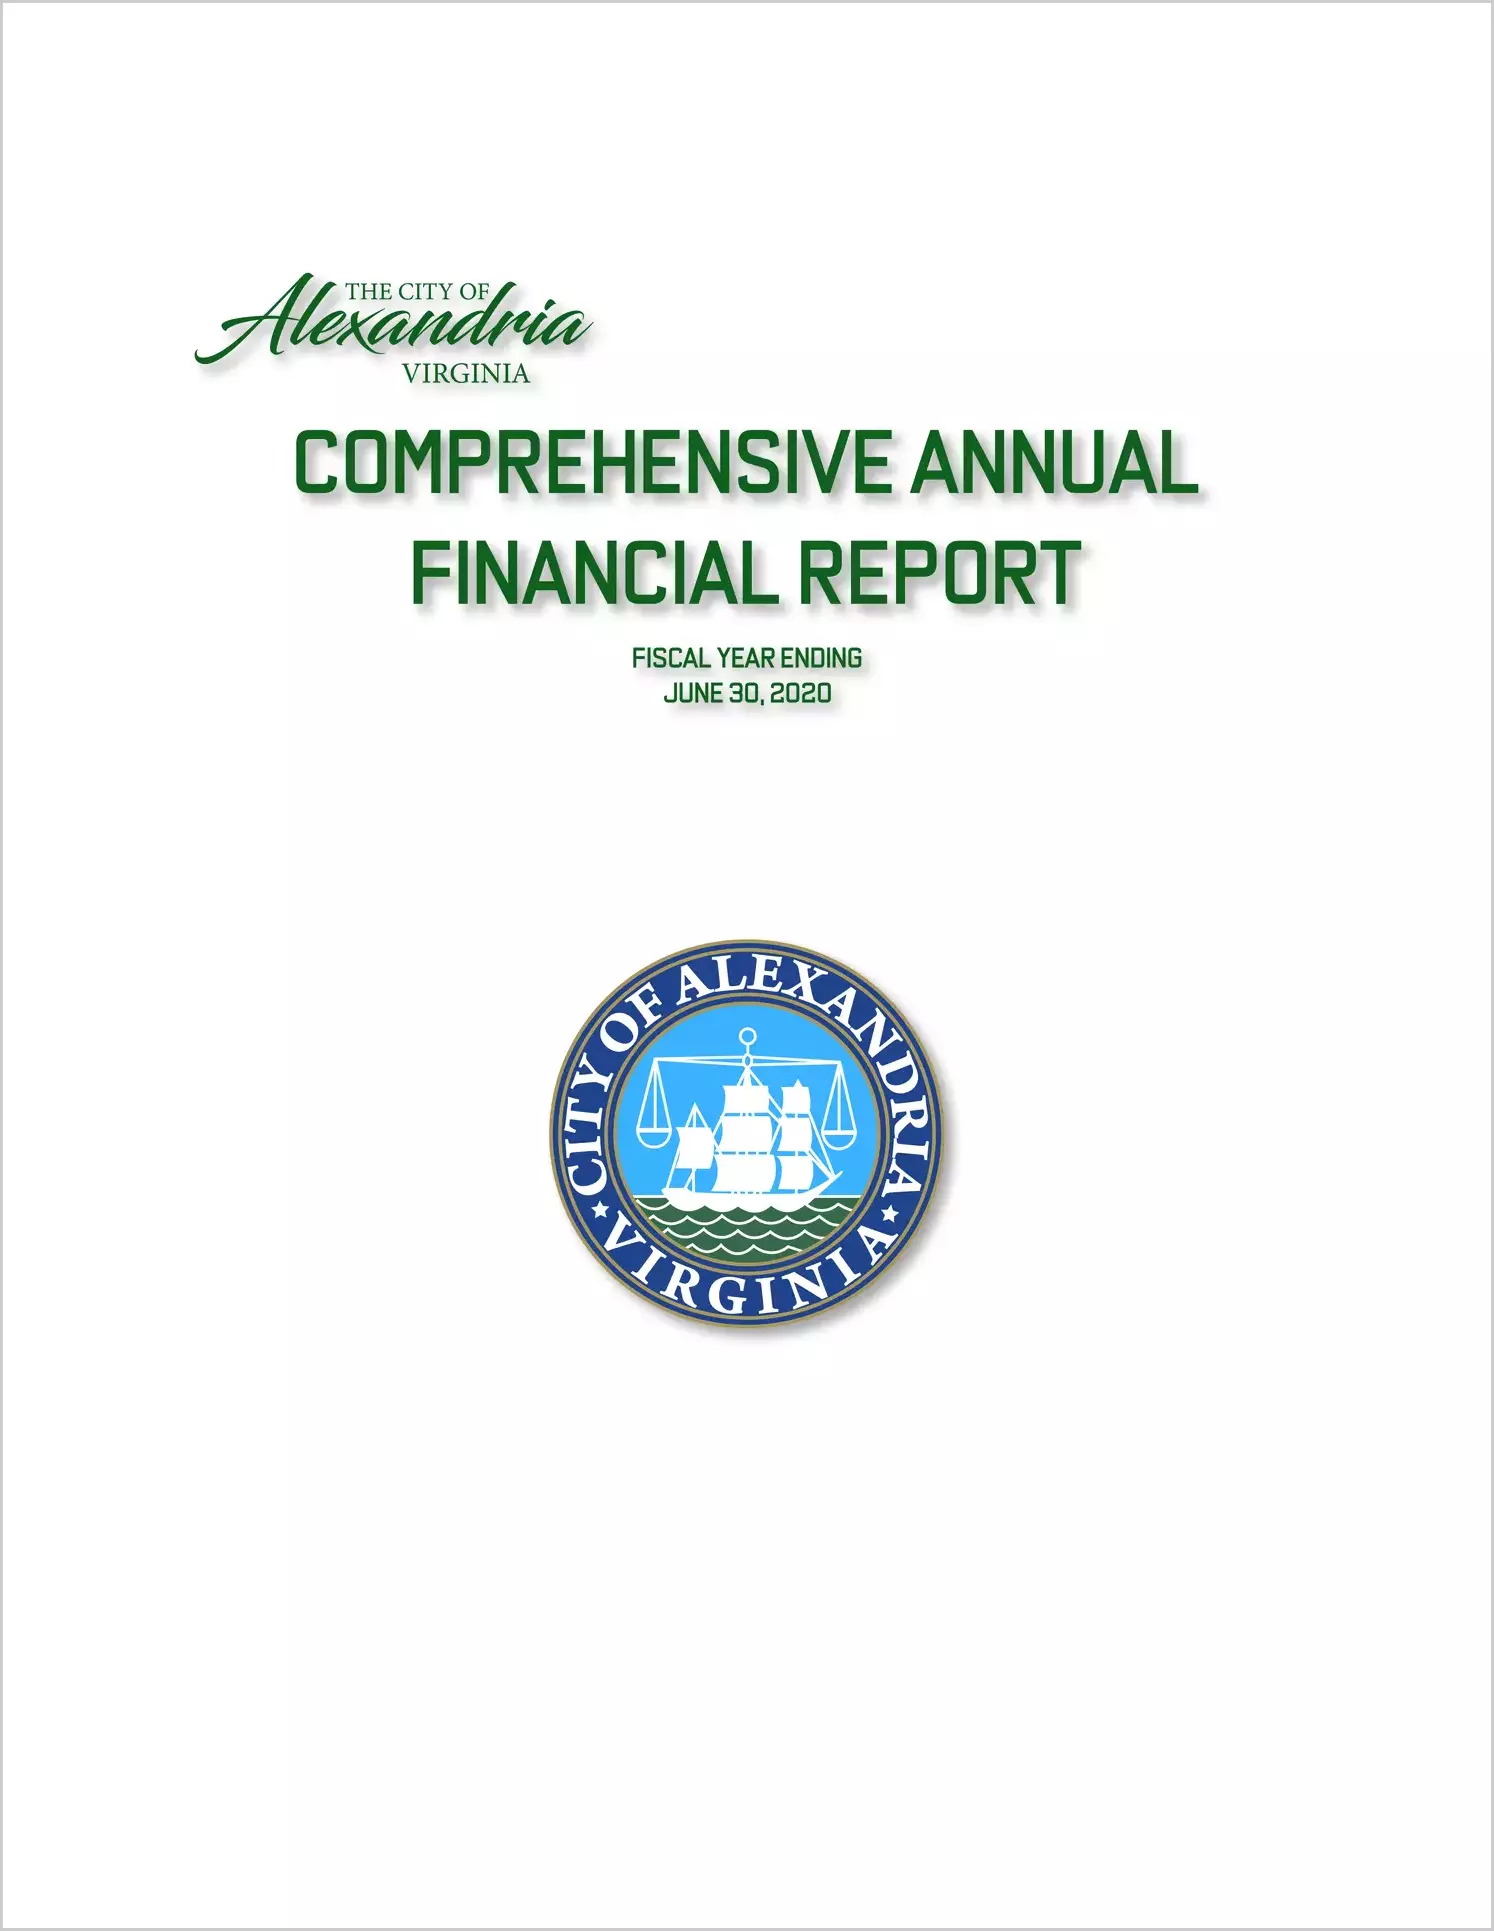 2020 Annual Financial Report for City of Alexandria